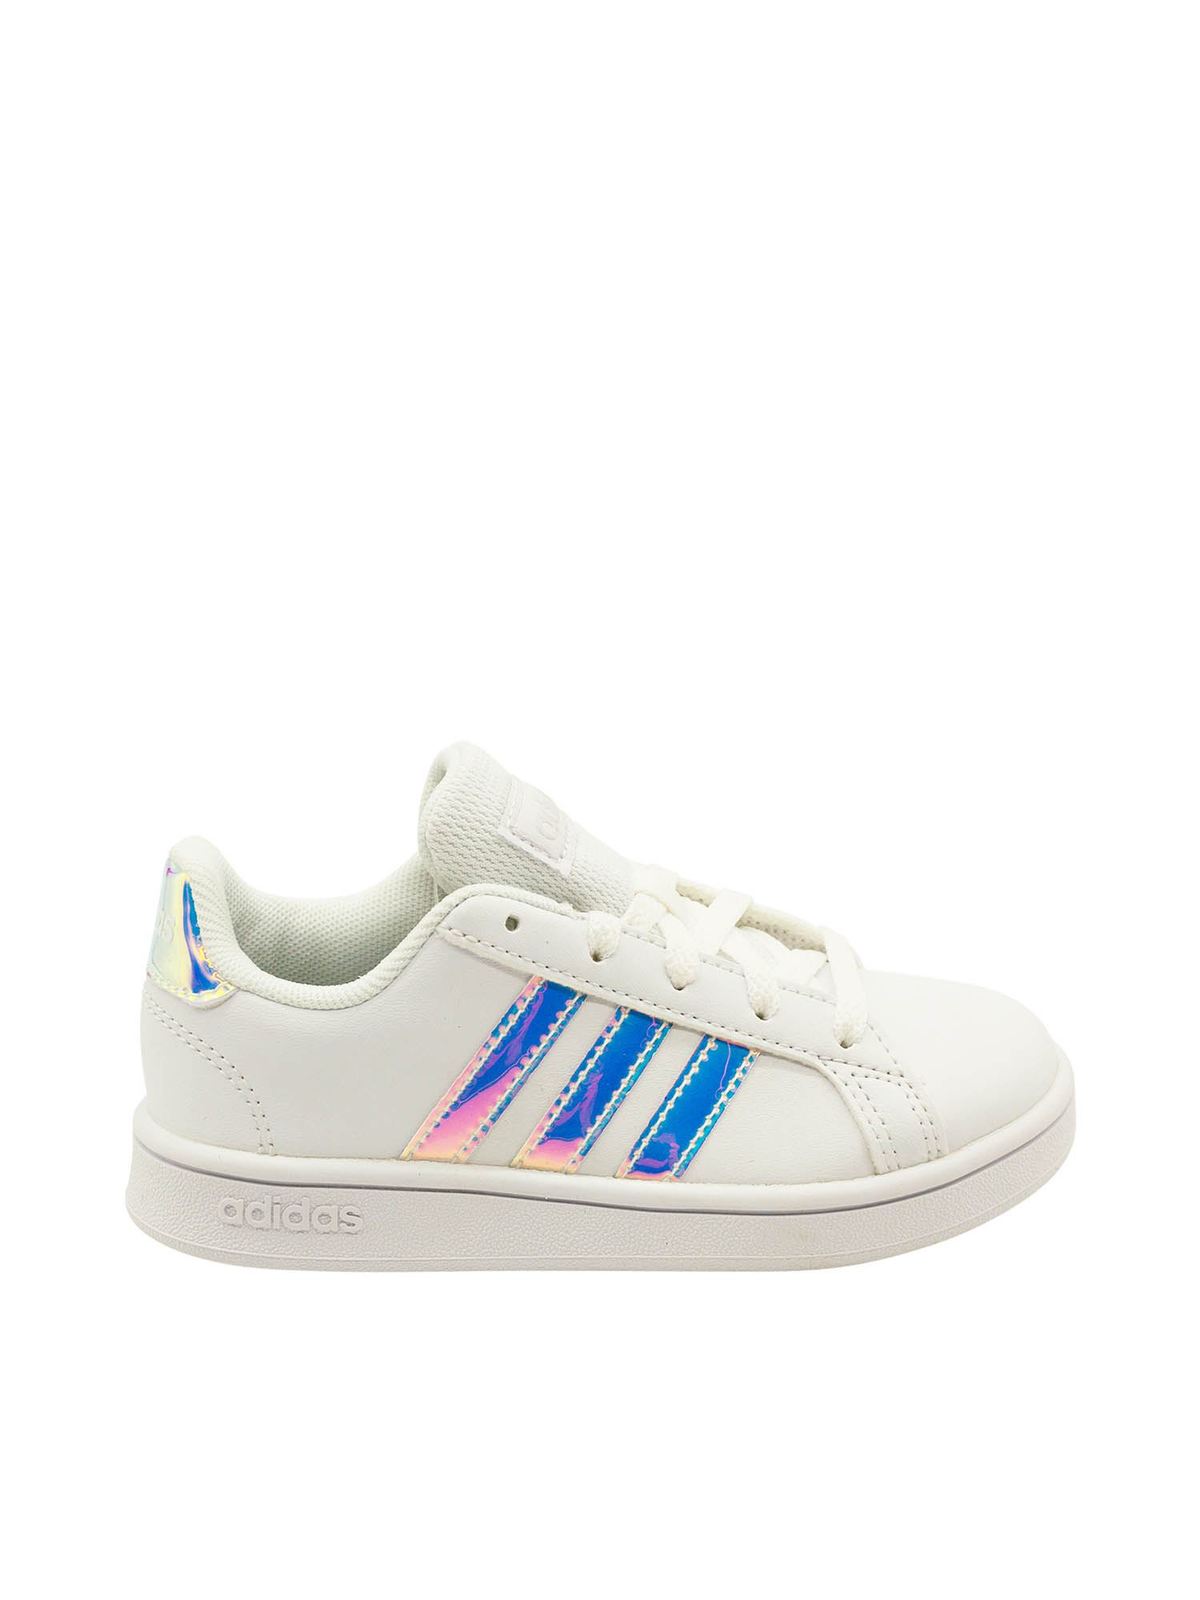 Trainers Adidas Originals - Grand Court sneakers in white - FW1274